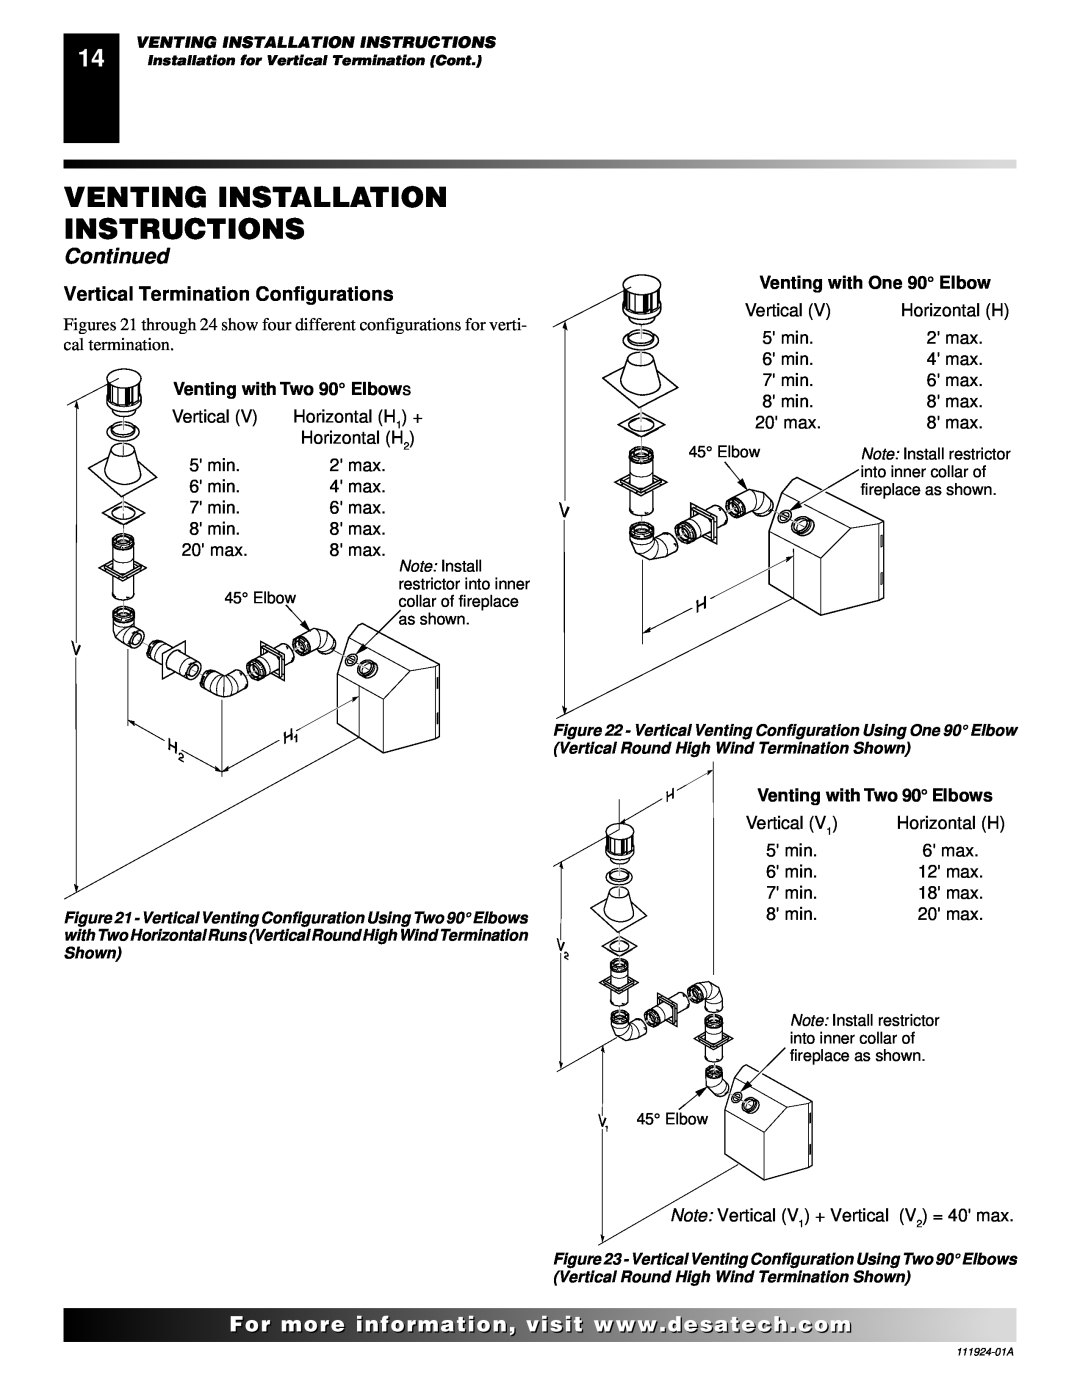 Desa K36EP Venting Installation Instructions, Continued, Vertical Termination Configurations, Venting with Two 90 Elbows 